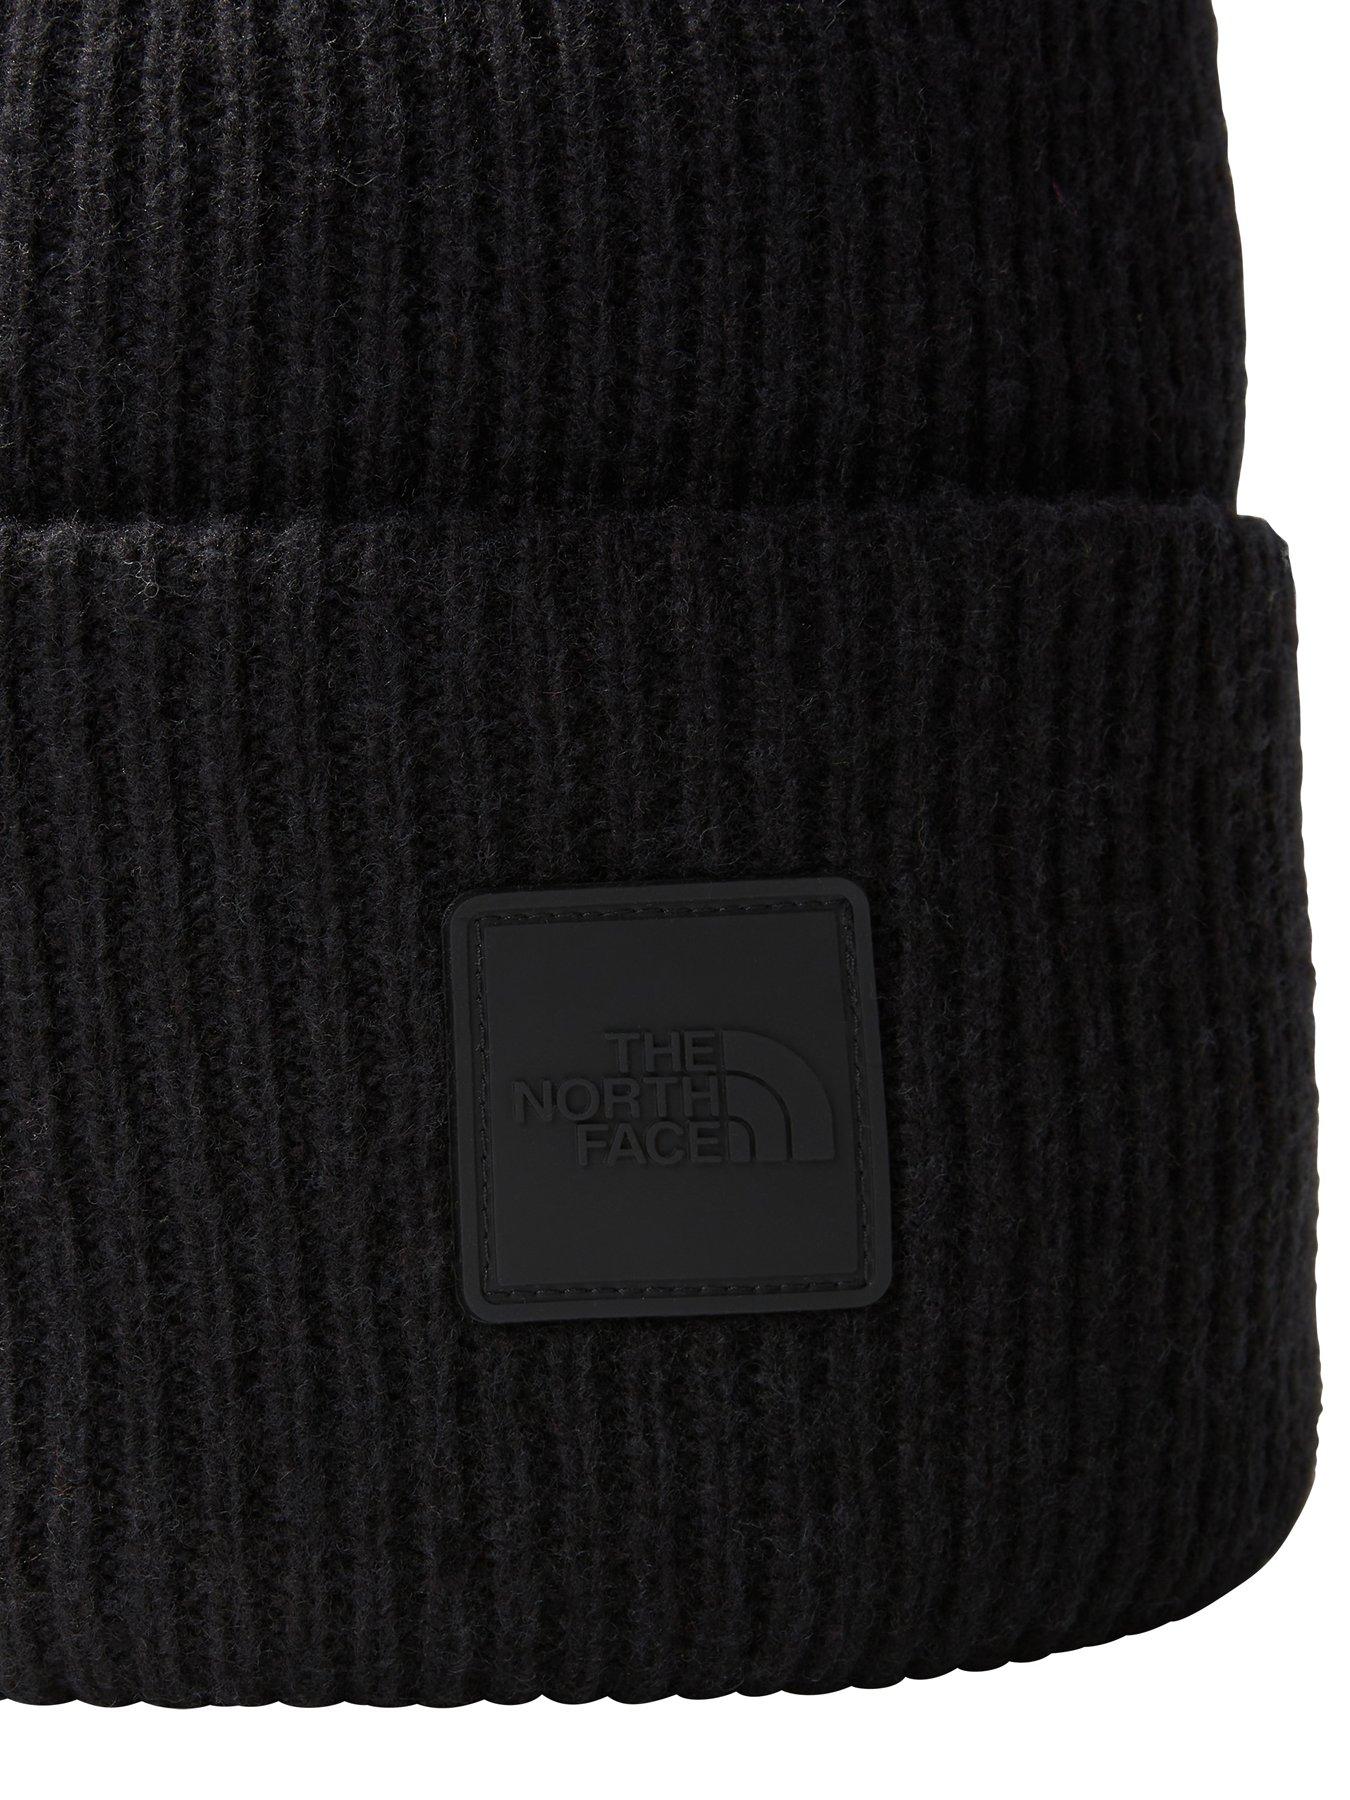 The North Face Patch -  UK